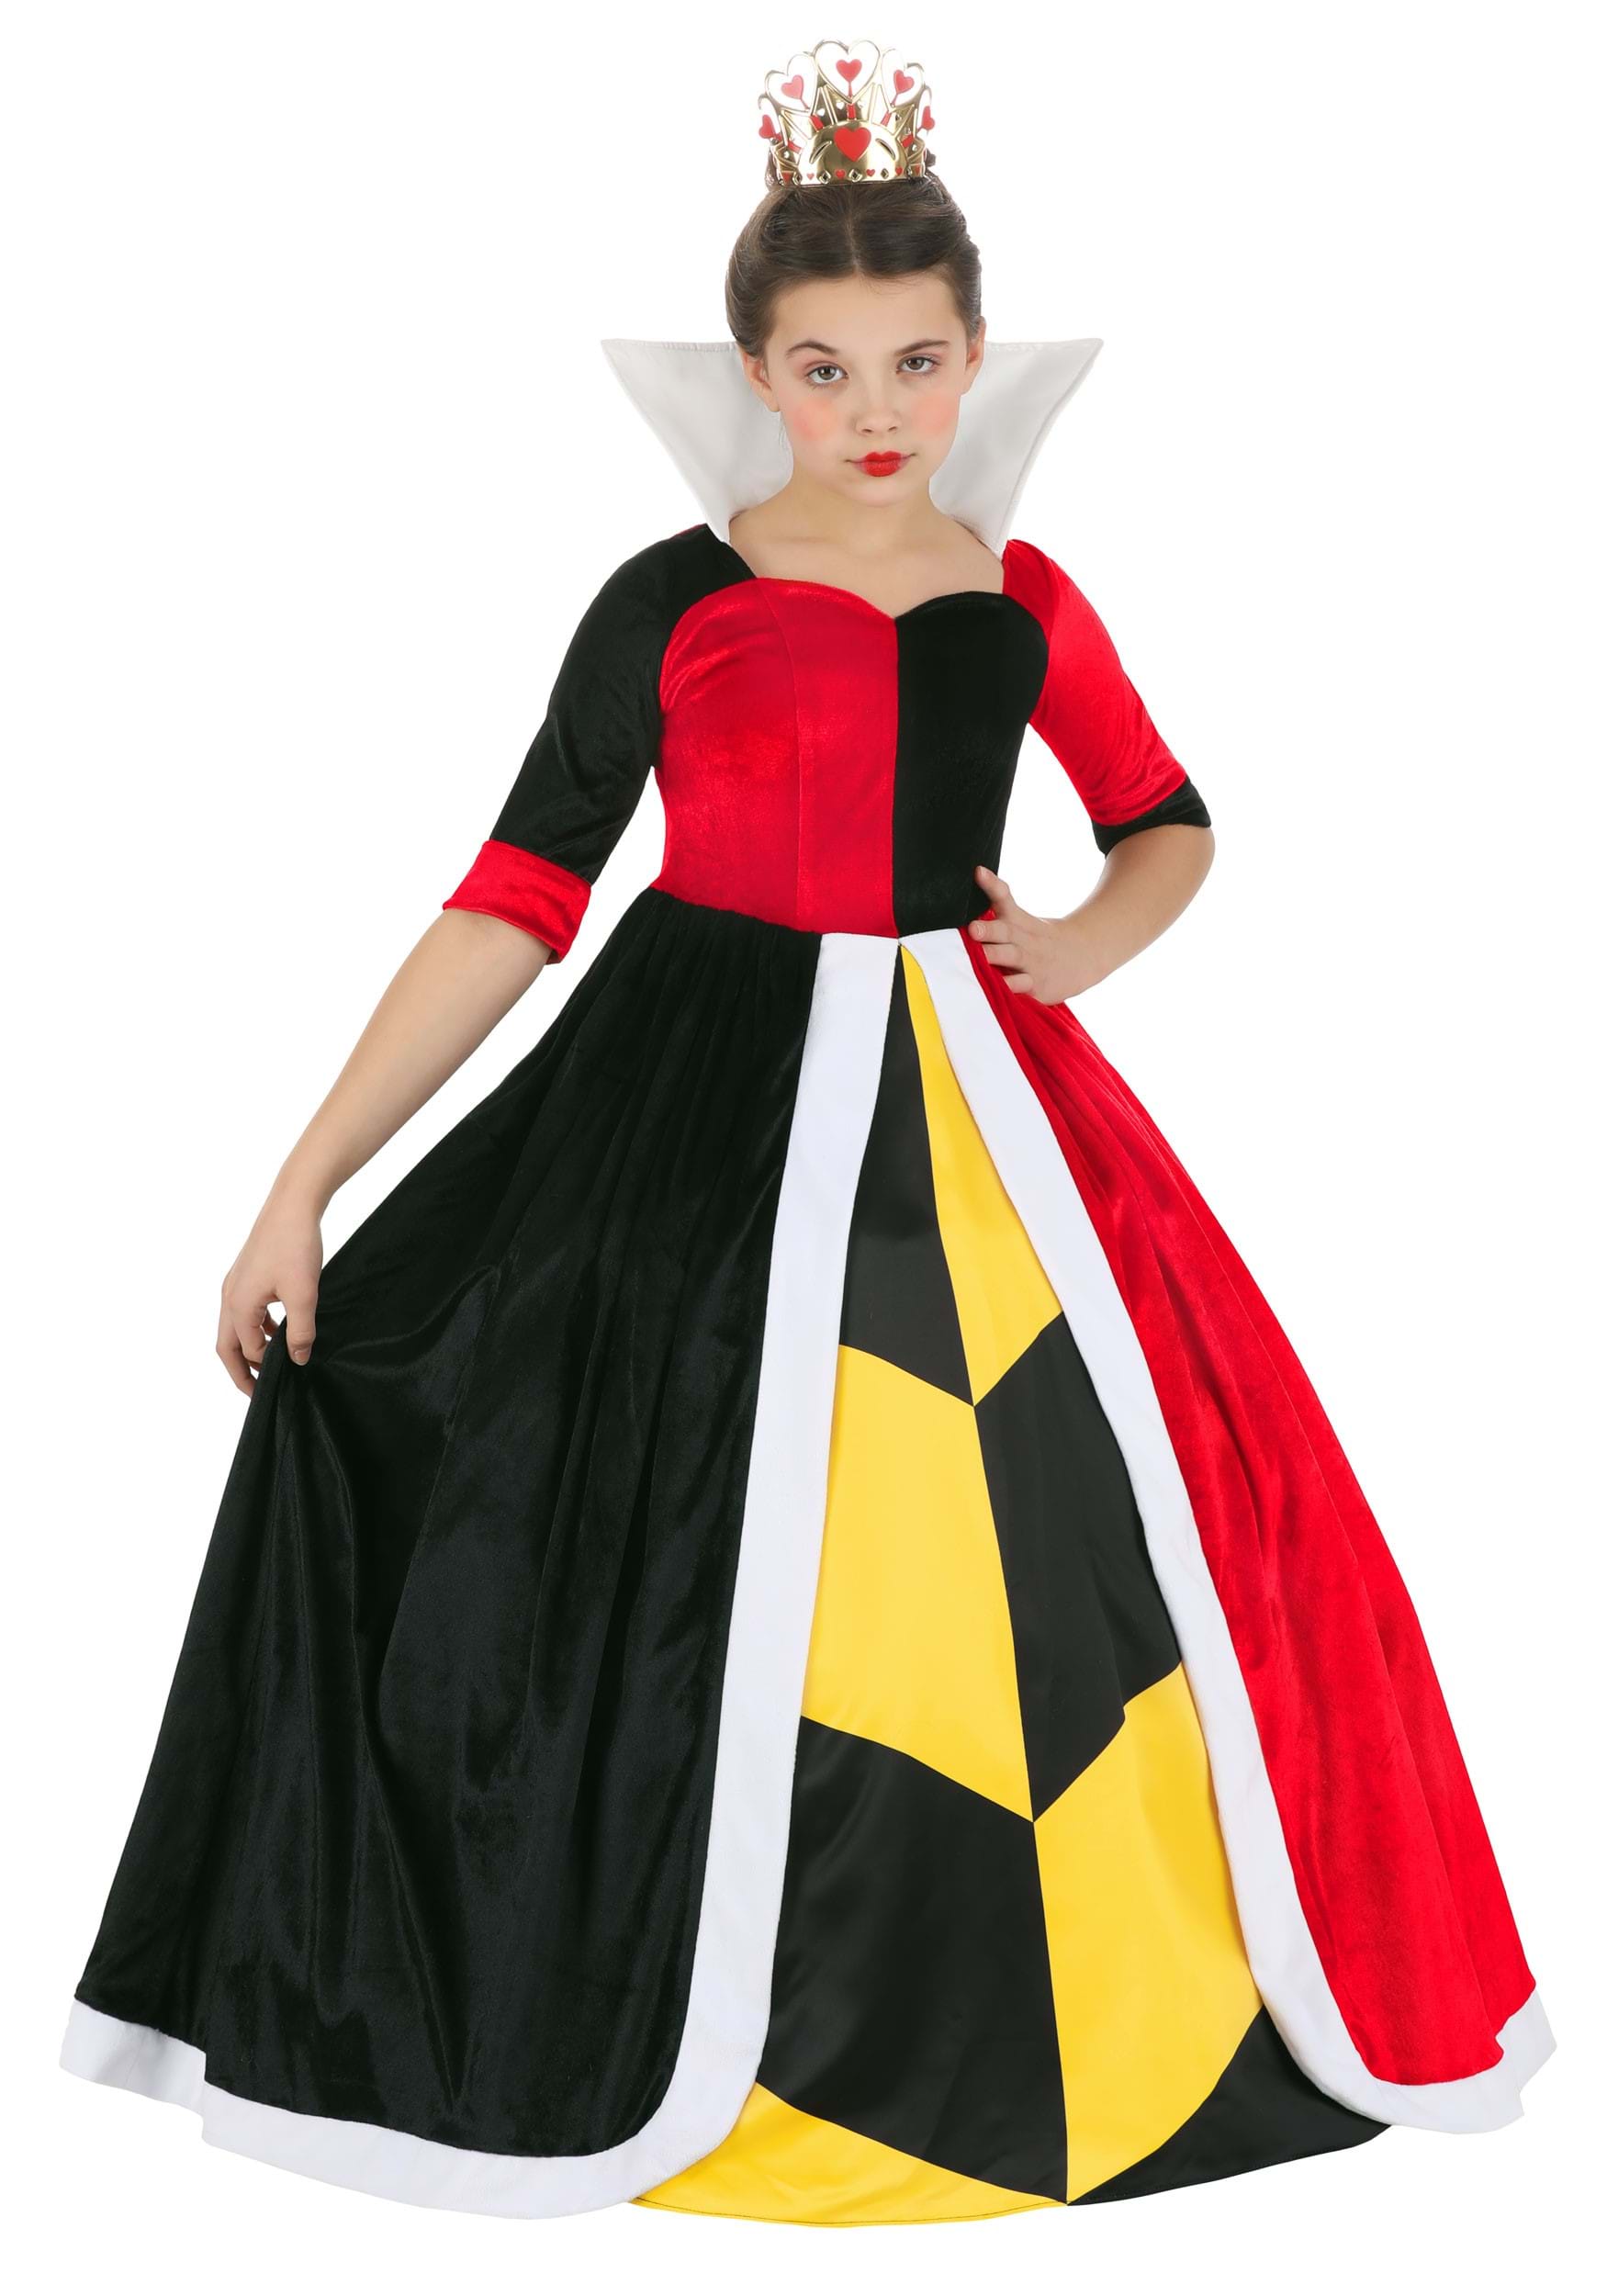 Image of Deluxe Disney Queen of Hearts Costume for Girls ID FUN4846CH-S